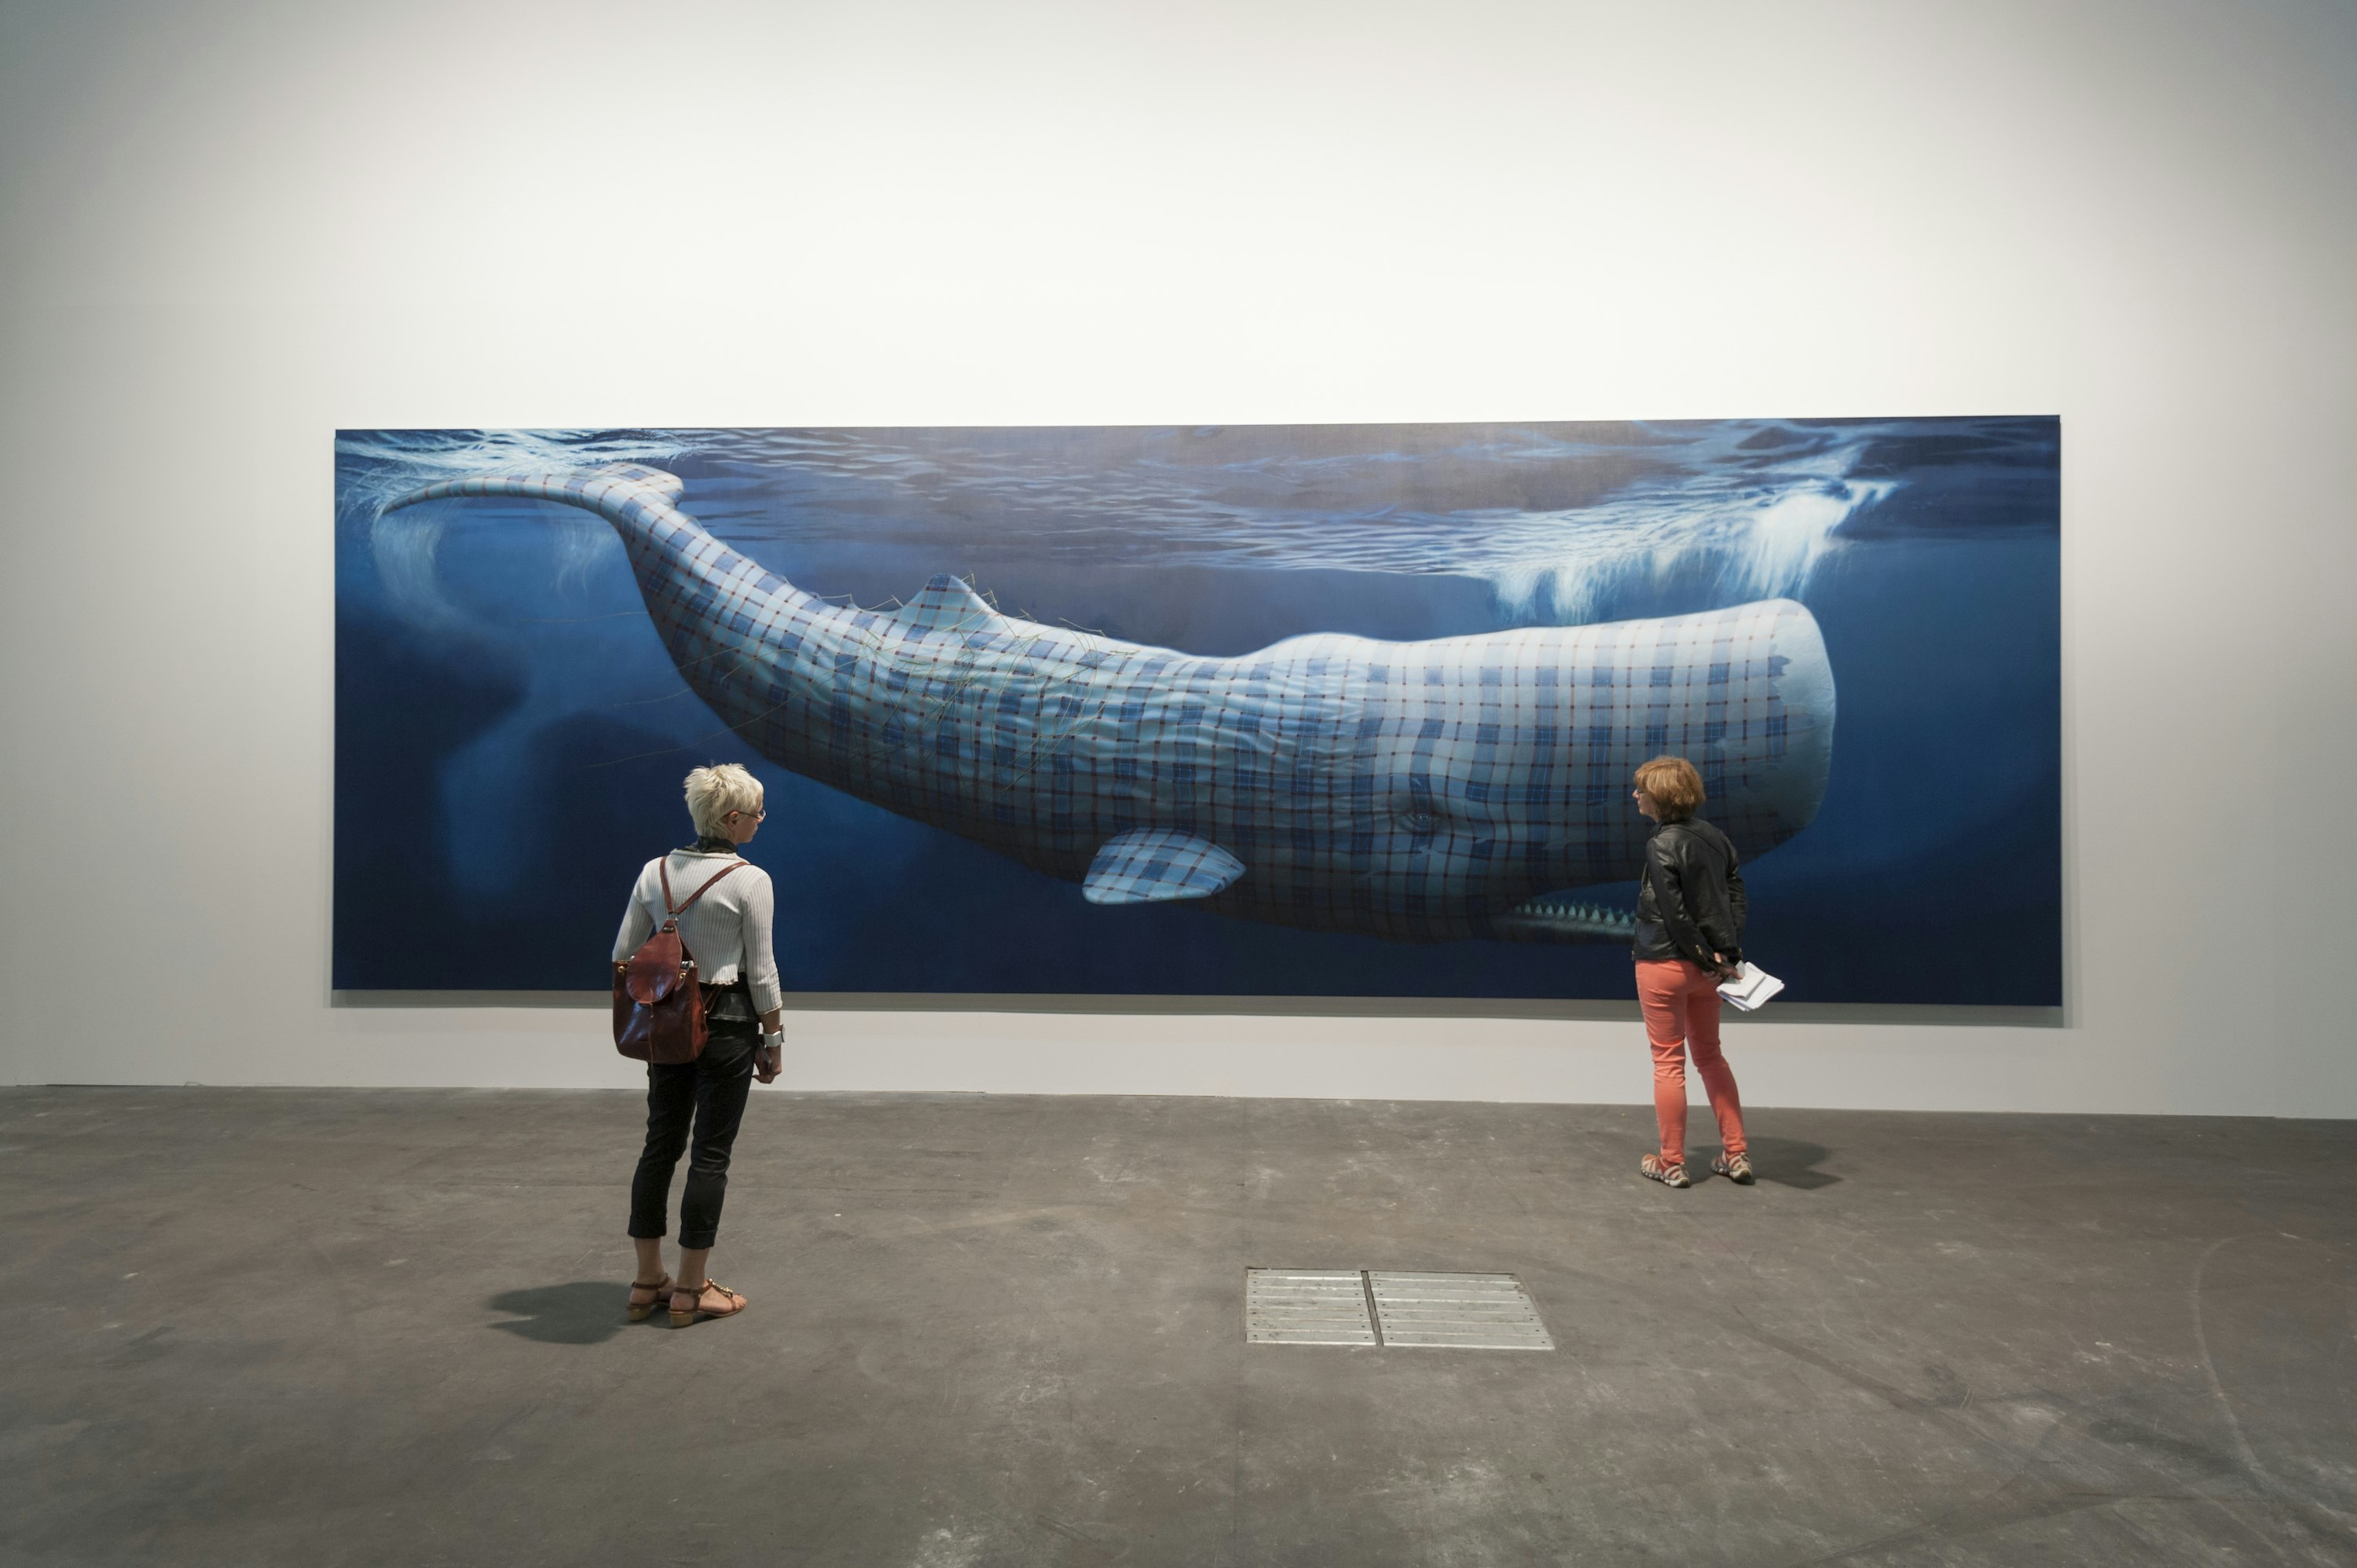 Visitors are watching the large painting "Moby Dick" by Sean Landers at the Art Basel in Basel, Switzerland, on June 14, 2013. * editorial use only *